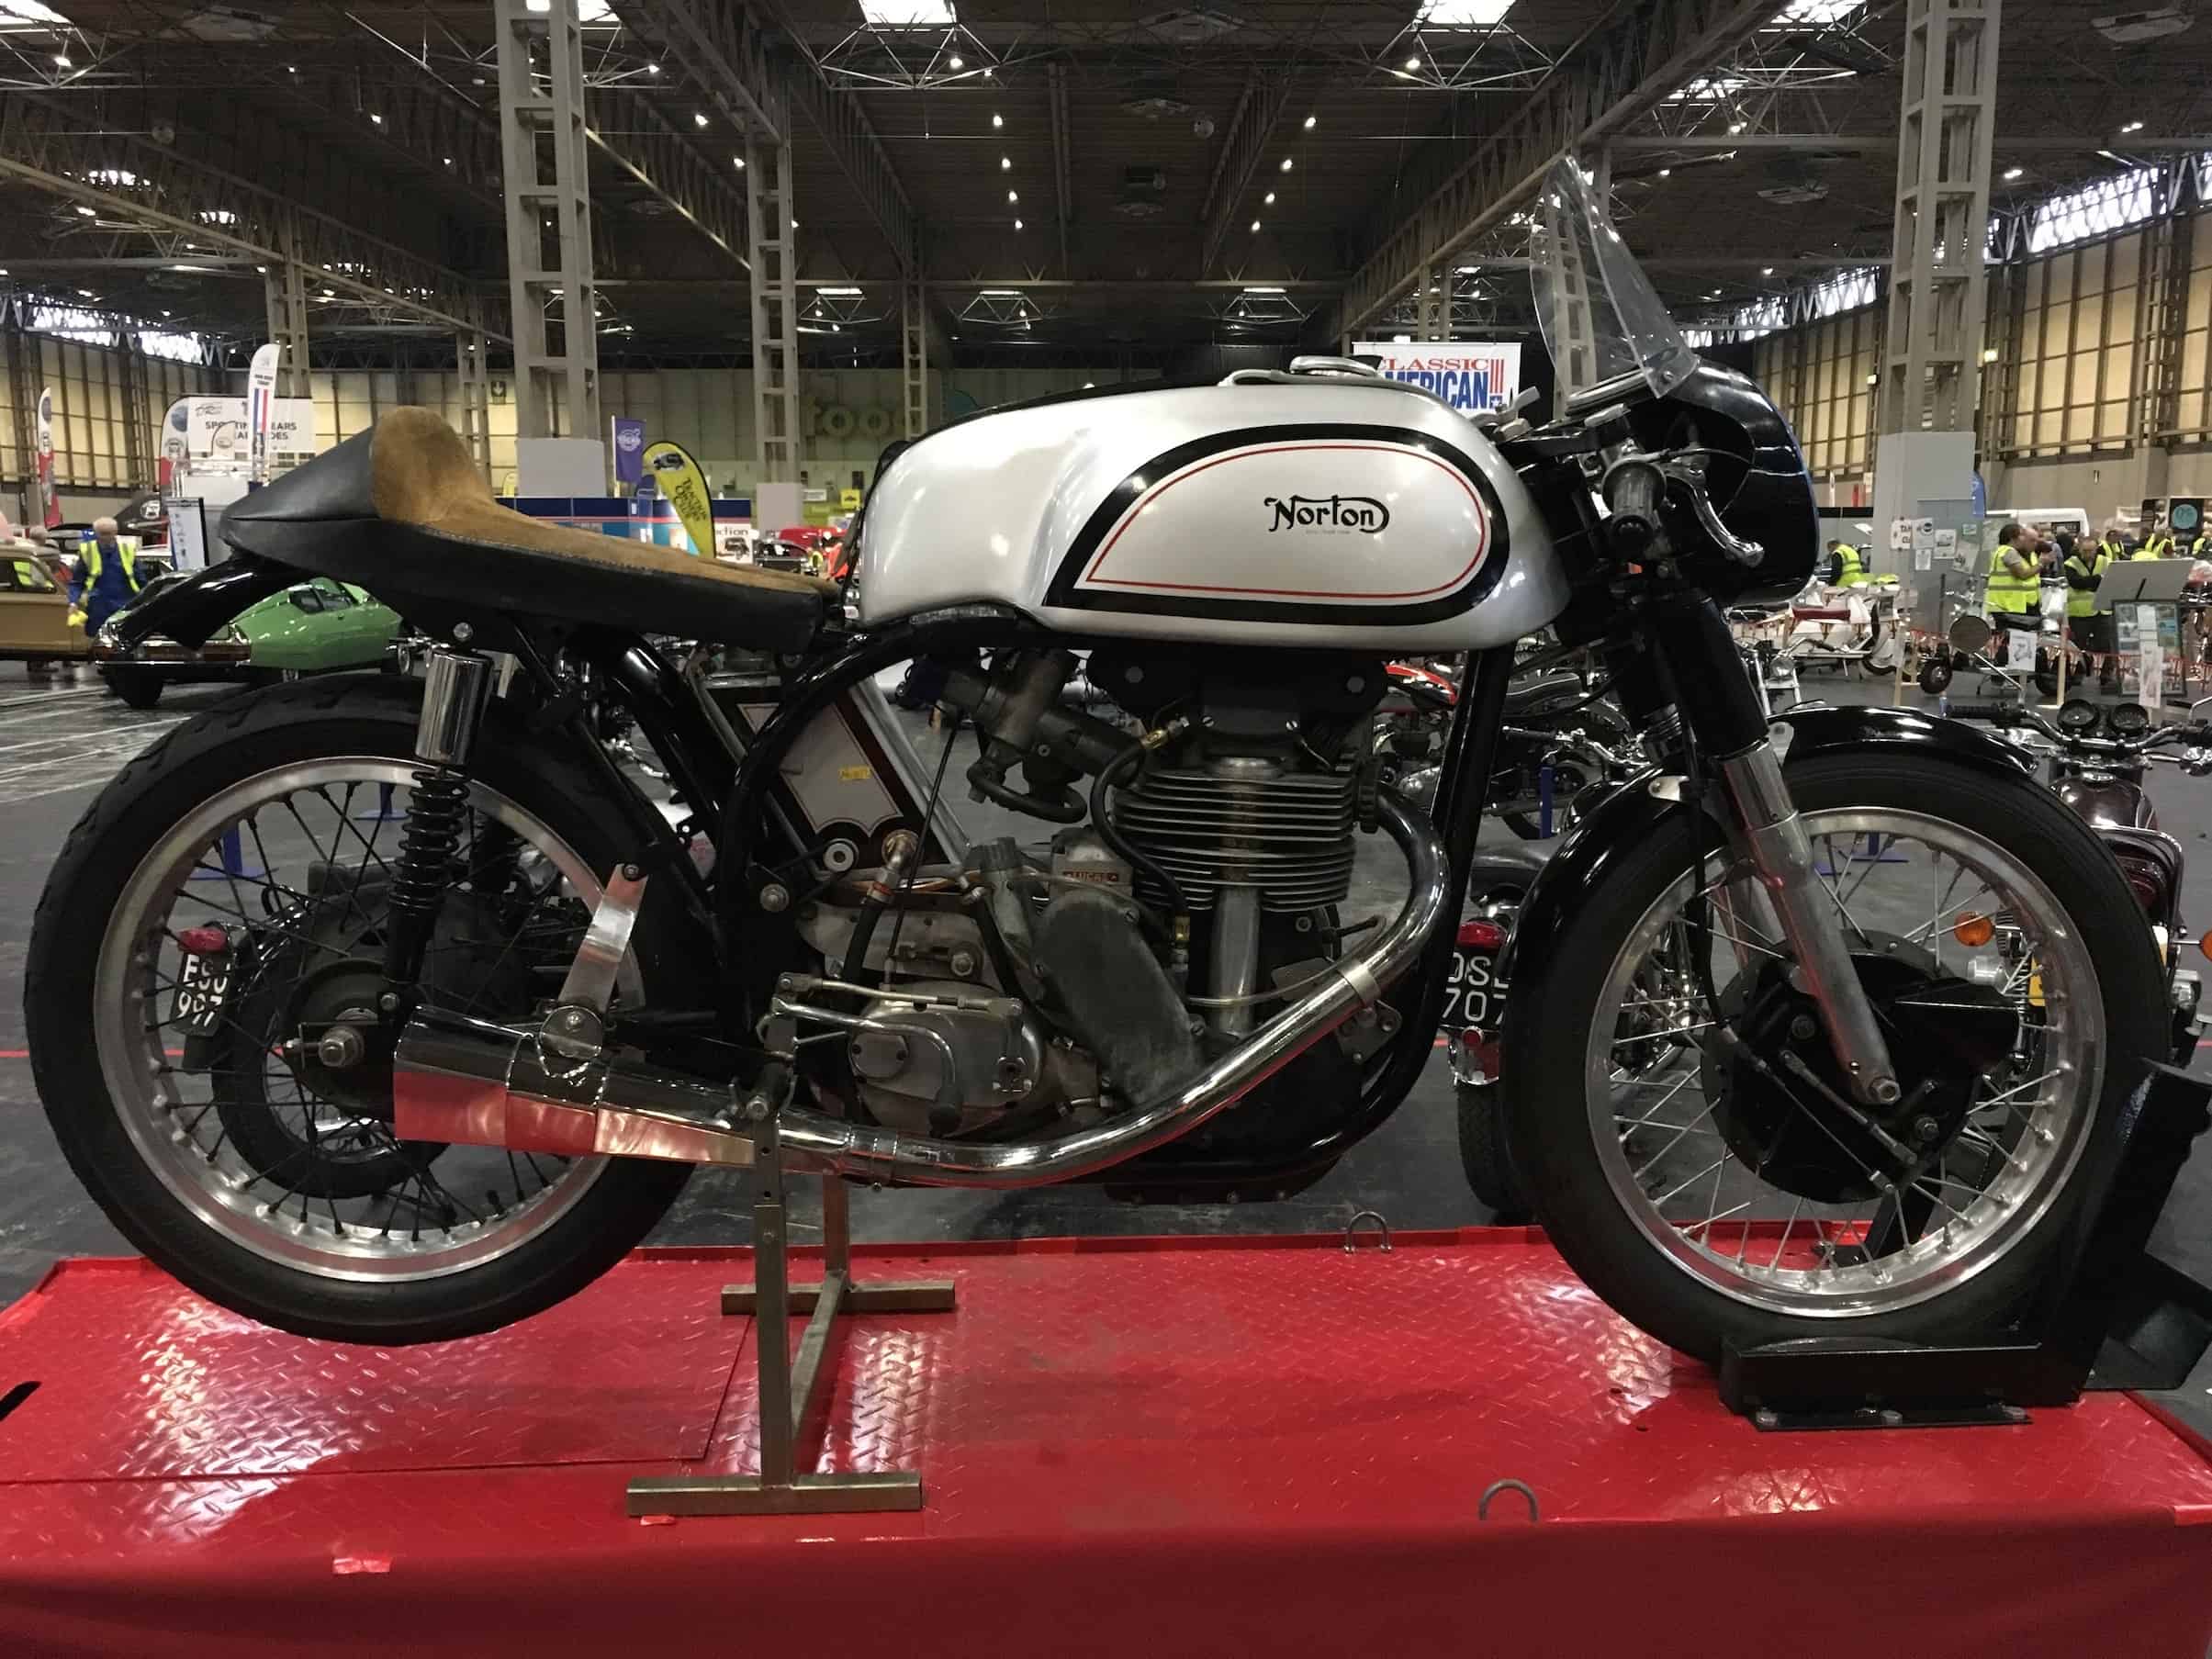 1961 Norton, 1941 Indian top H&H Classics' motorcycle auction